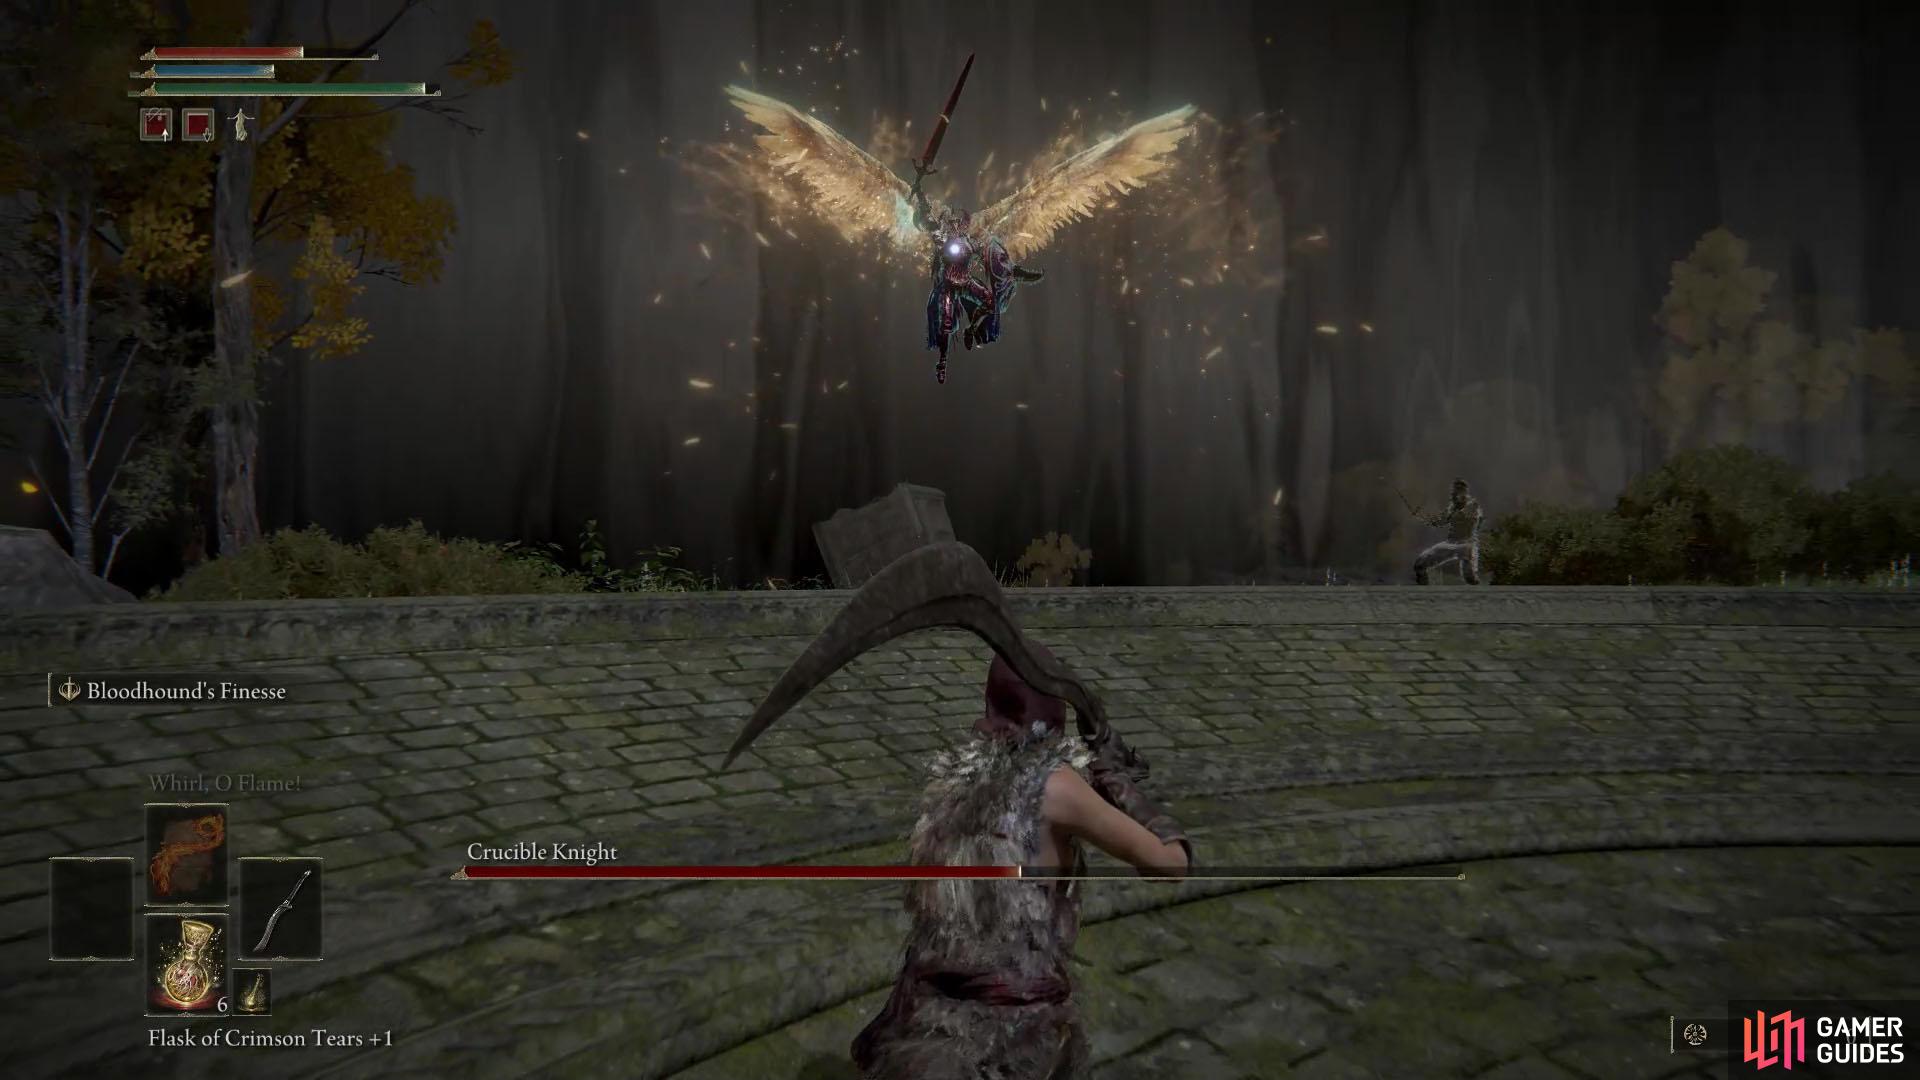 During the second phase, Crucible Knight conjures up some wings!